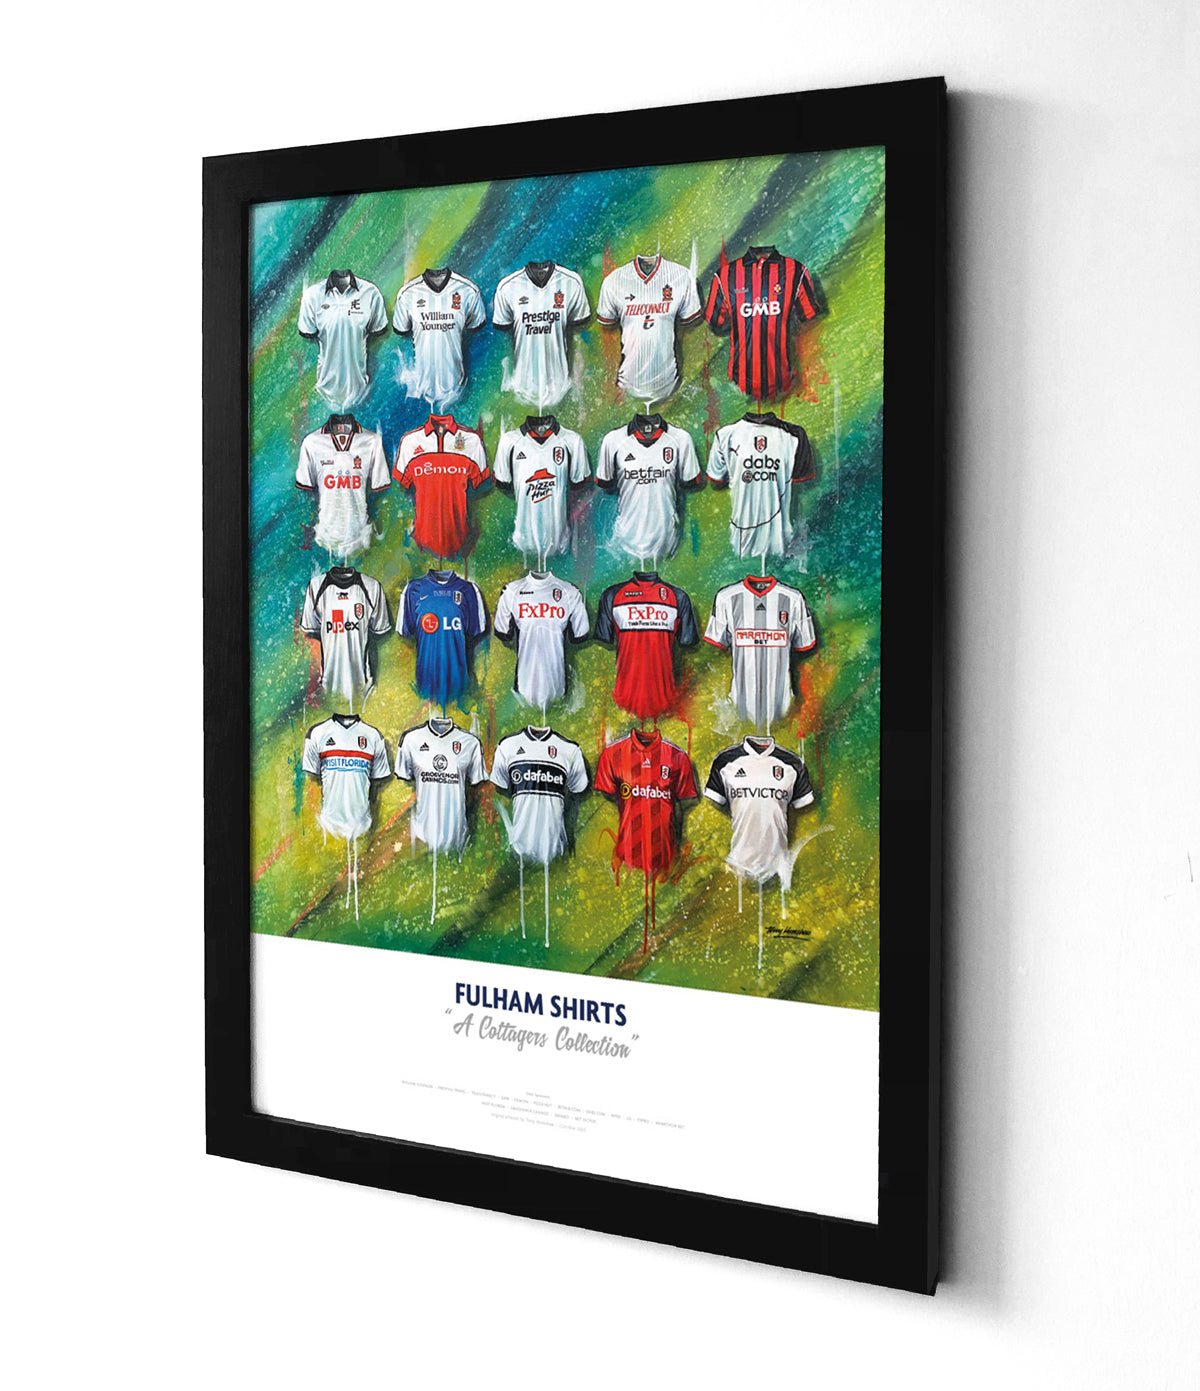 Artwork by Terry Kneeshaw depicting a collection of twenty iconic Fulham football jerseys worn by the club's players throughout their history. The jerseys are predominantly white with black accents and feature the Fulham crest and various sponsor logos on the front. The artwork is a high-quality print of a hand-painted original, which uses textured brushstrokes to create a dynamic effect. 